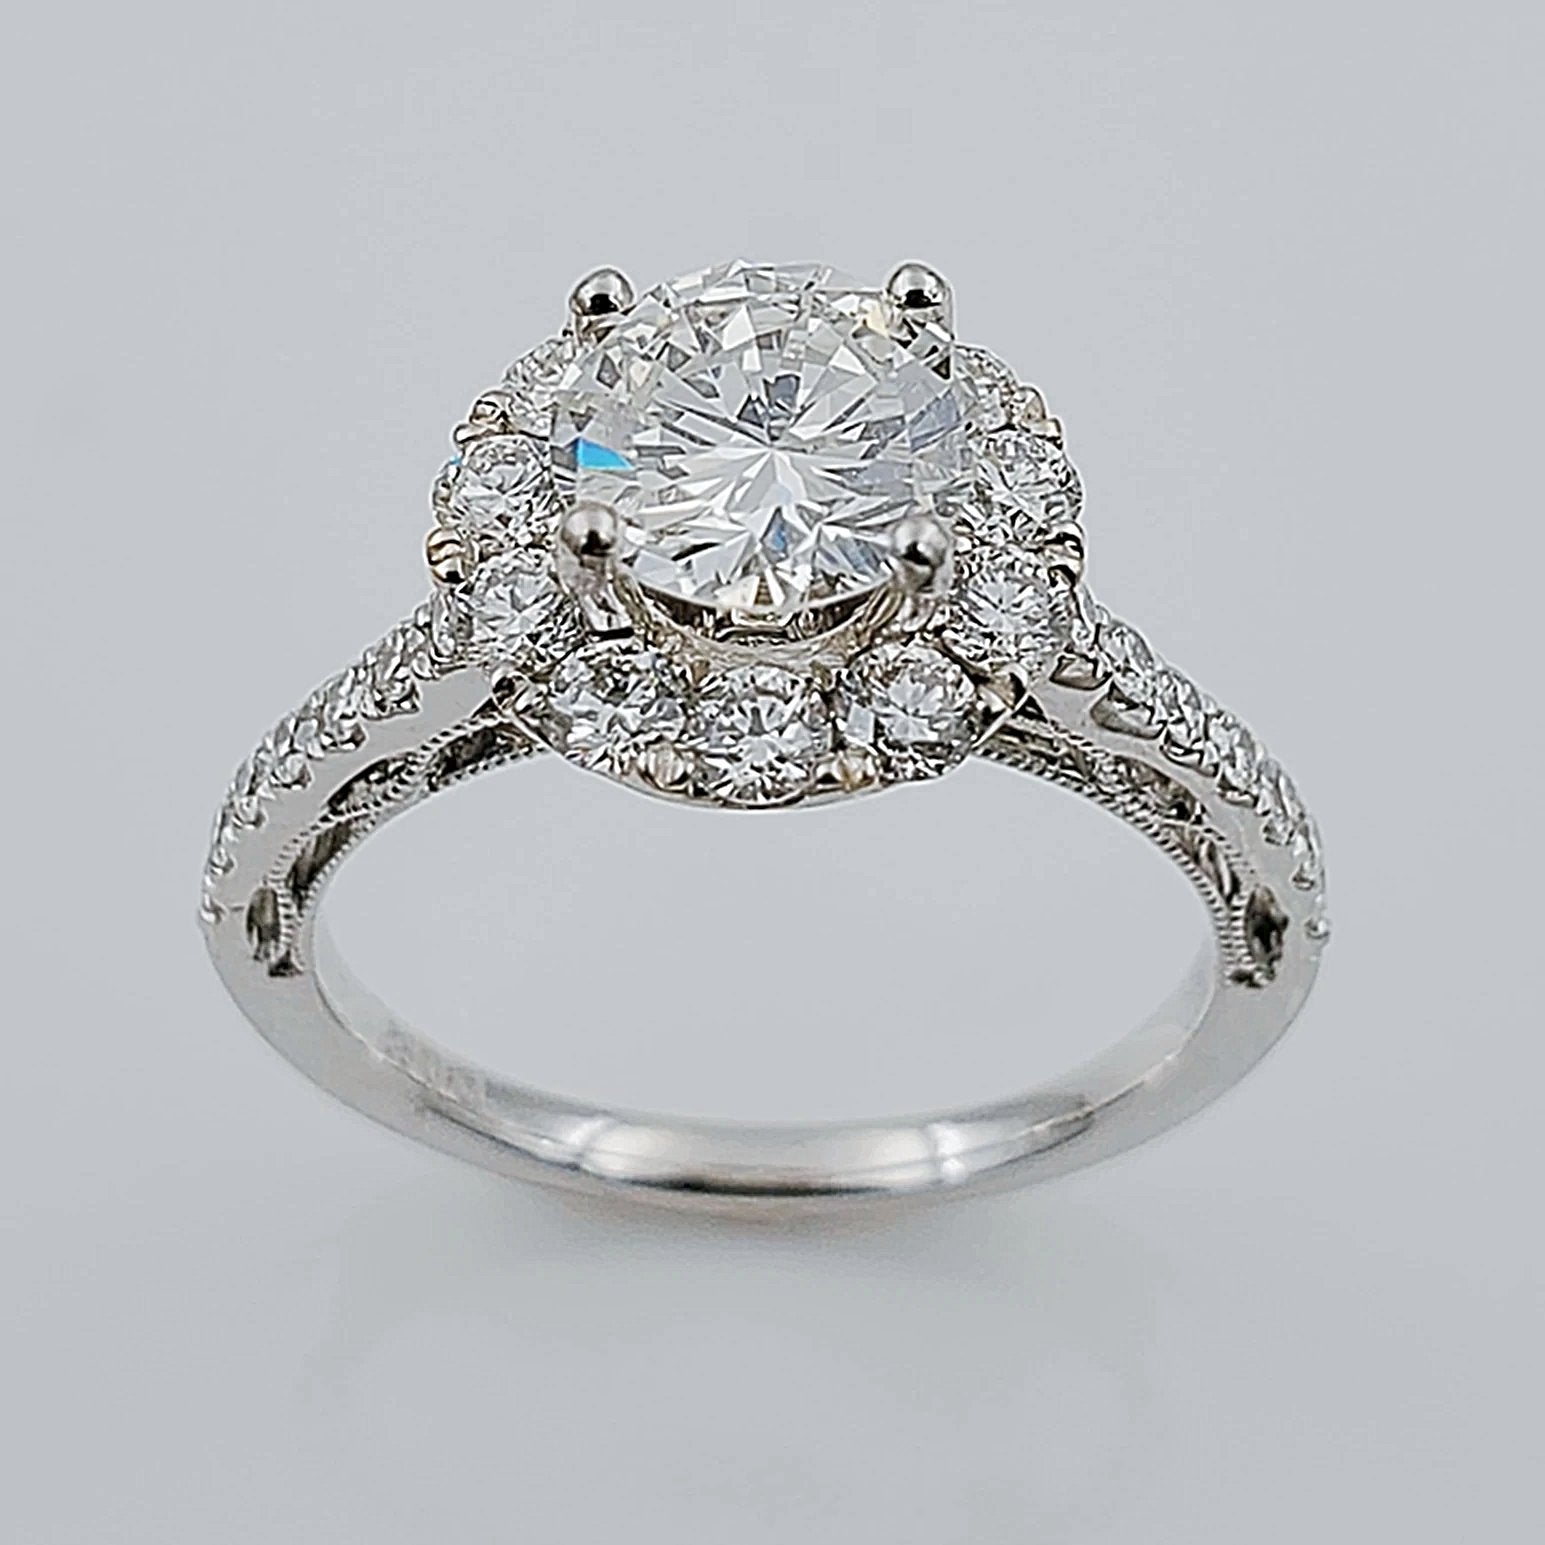 Women's 14K White Gold with 1.22 CT Round Center Diamond (VS2 Color G) 3.3 GR Total Weight Wedding Ring. (Size: 6.25)